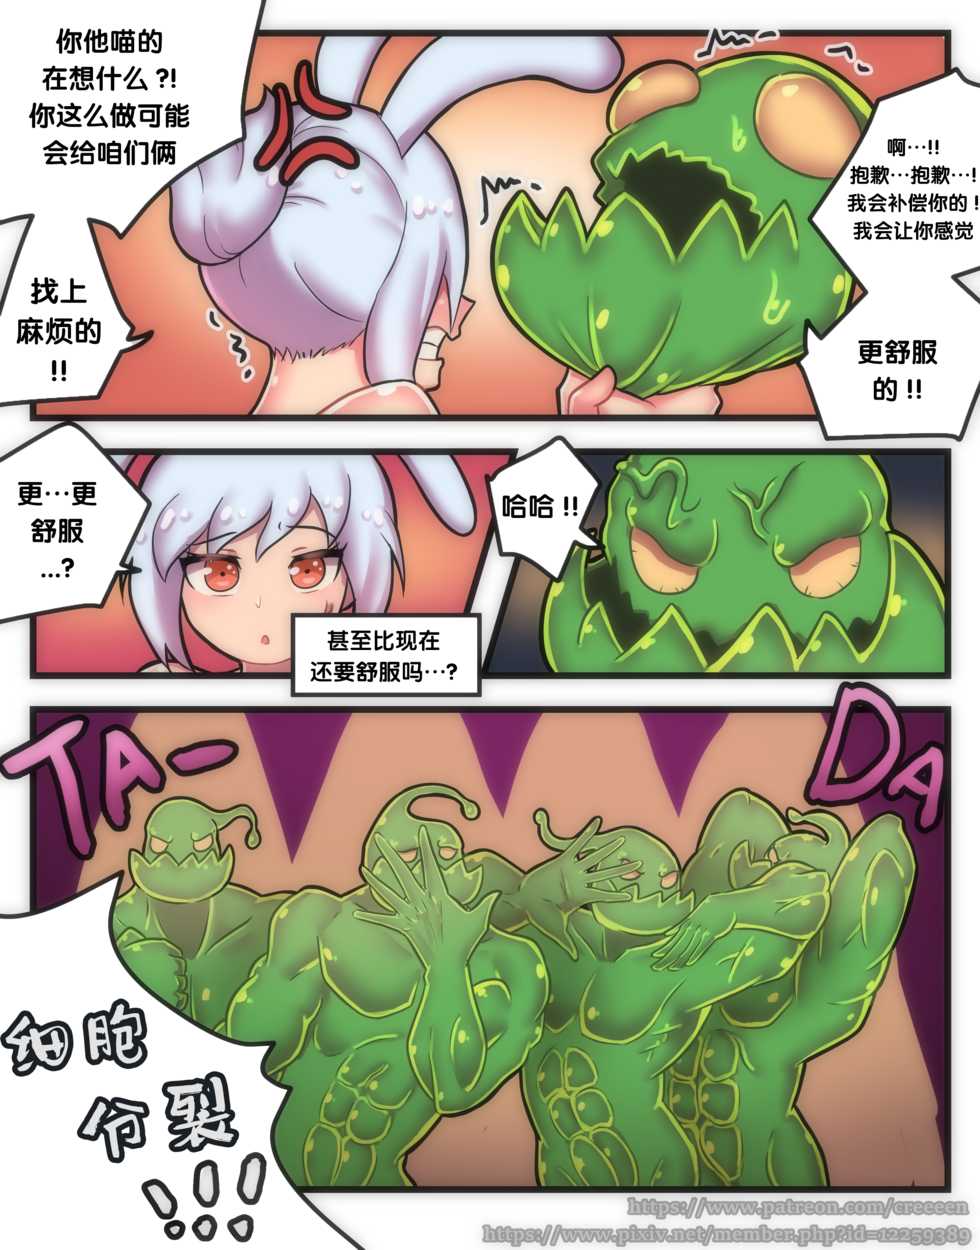 [Creeeen] Rabbit Jelly (League of Legends) [Chinese] [新桥月白日语社] - Page 15